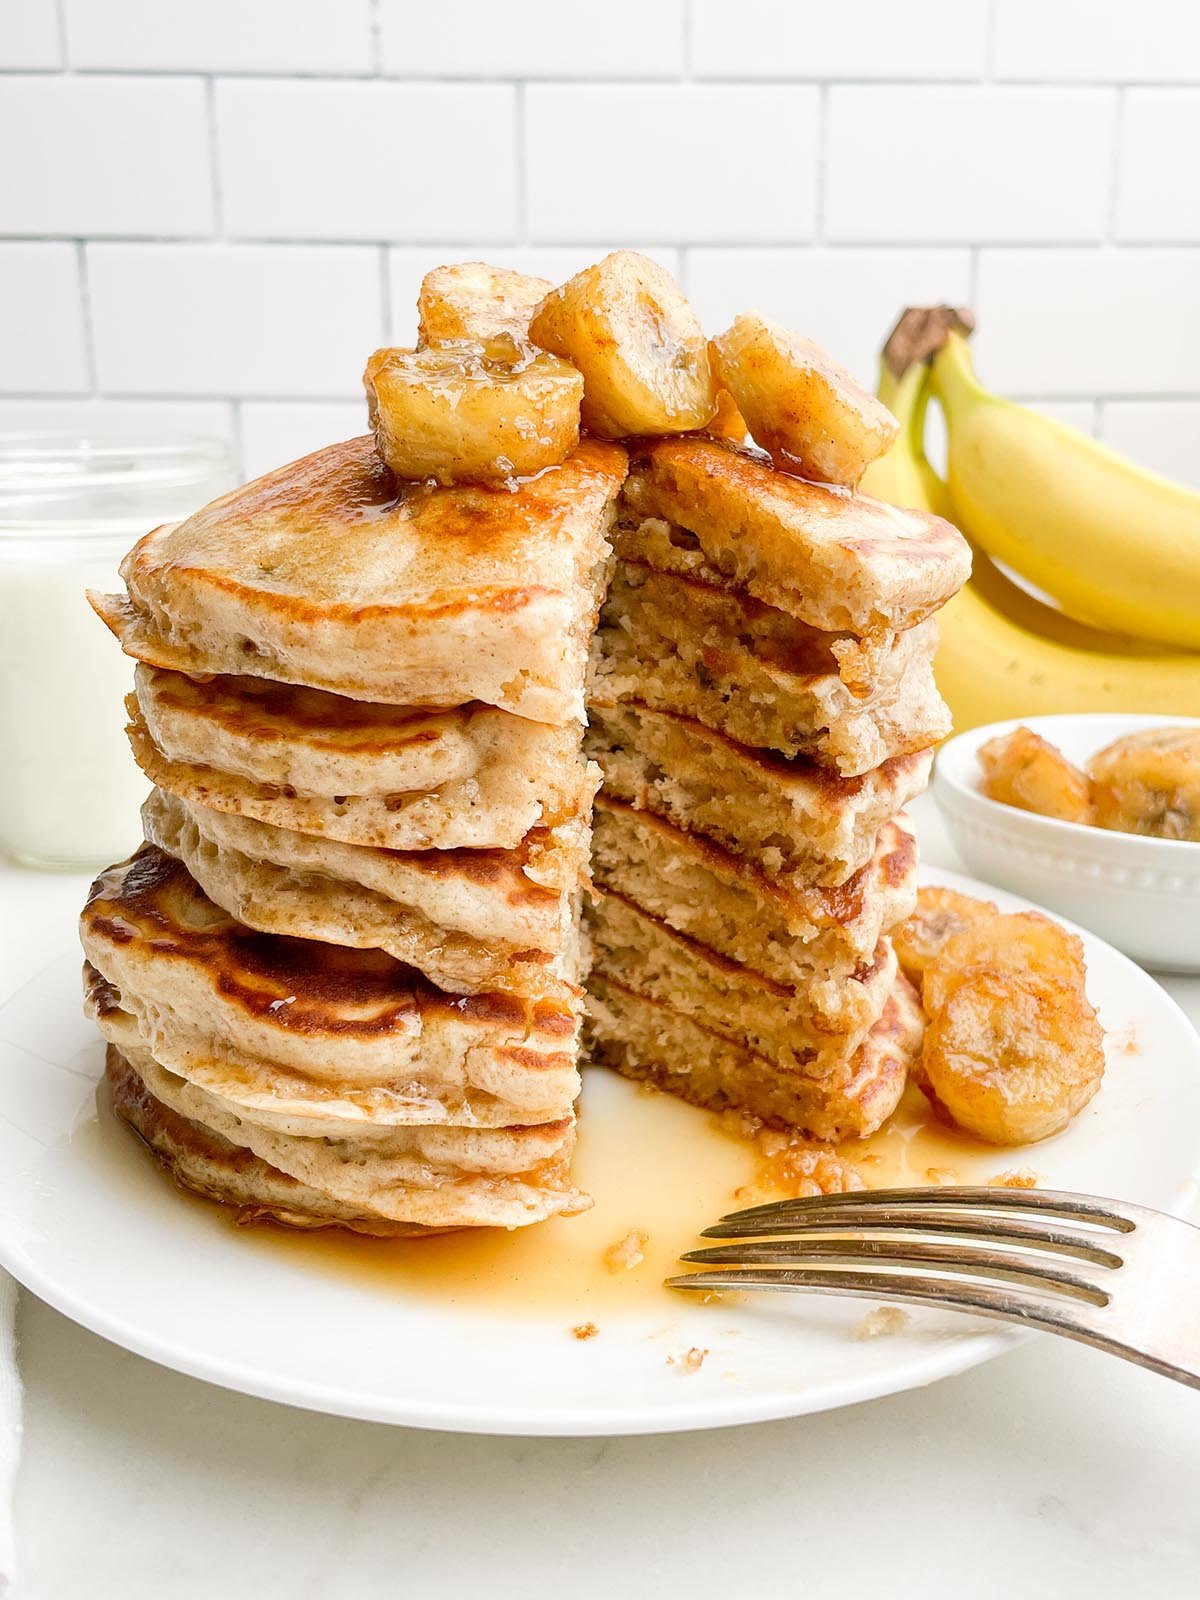 stack of banana pancakes from pancake mix topped with bananas and maple syrup.